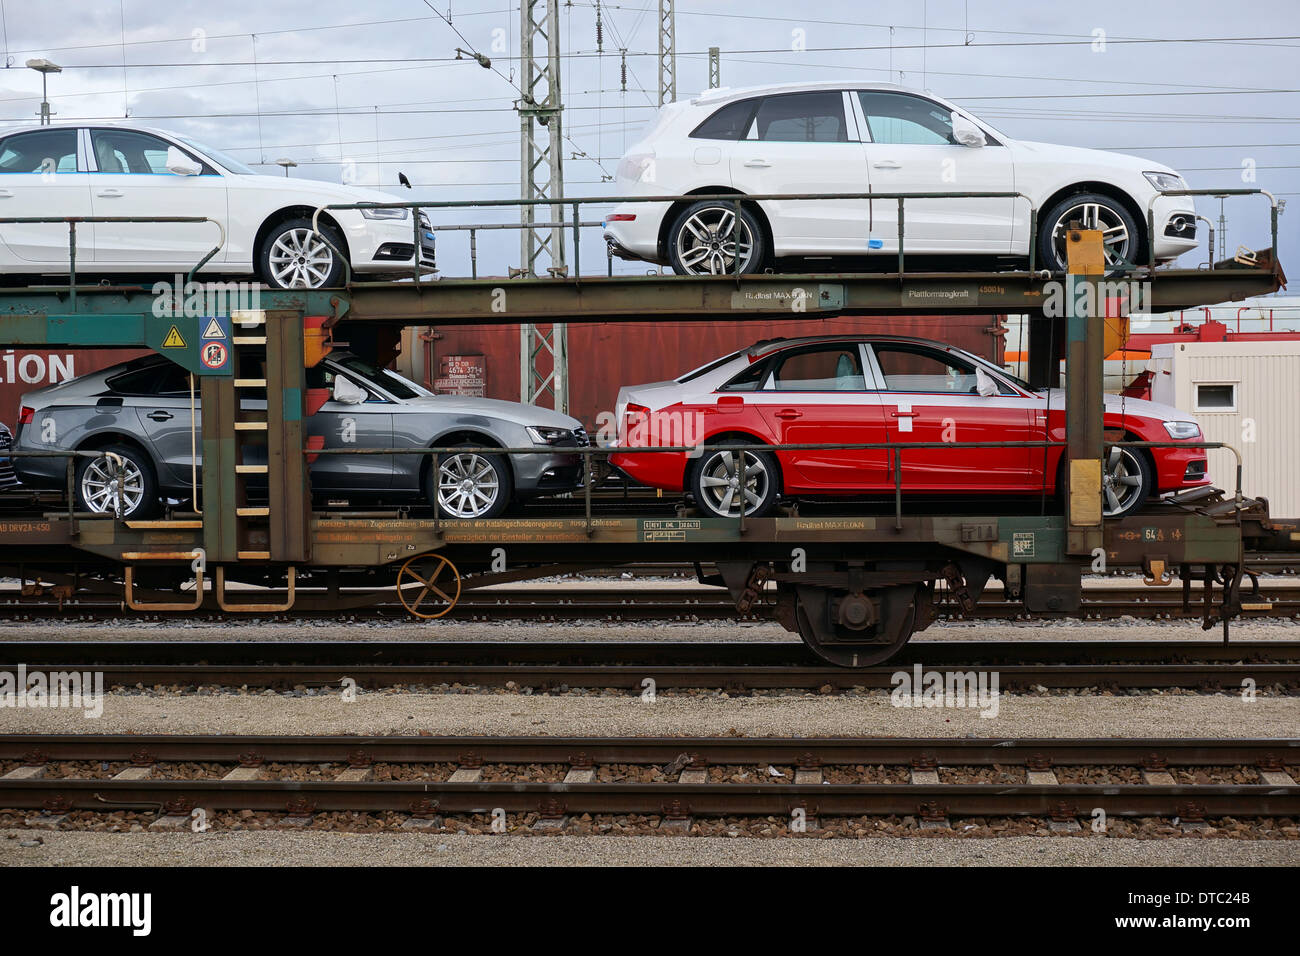 Germany: New Audi cars on freight trains in Ingolstadt (Audi headquarters) - 09 February 2014 Stock Photo